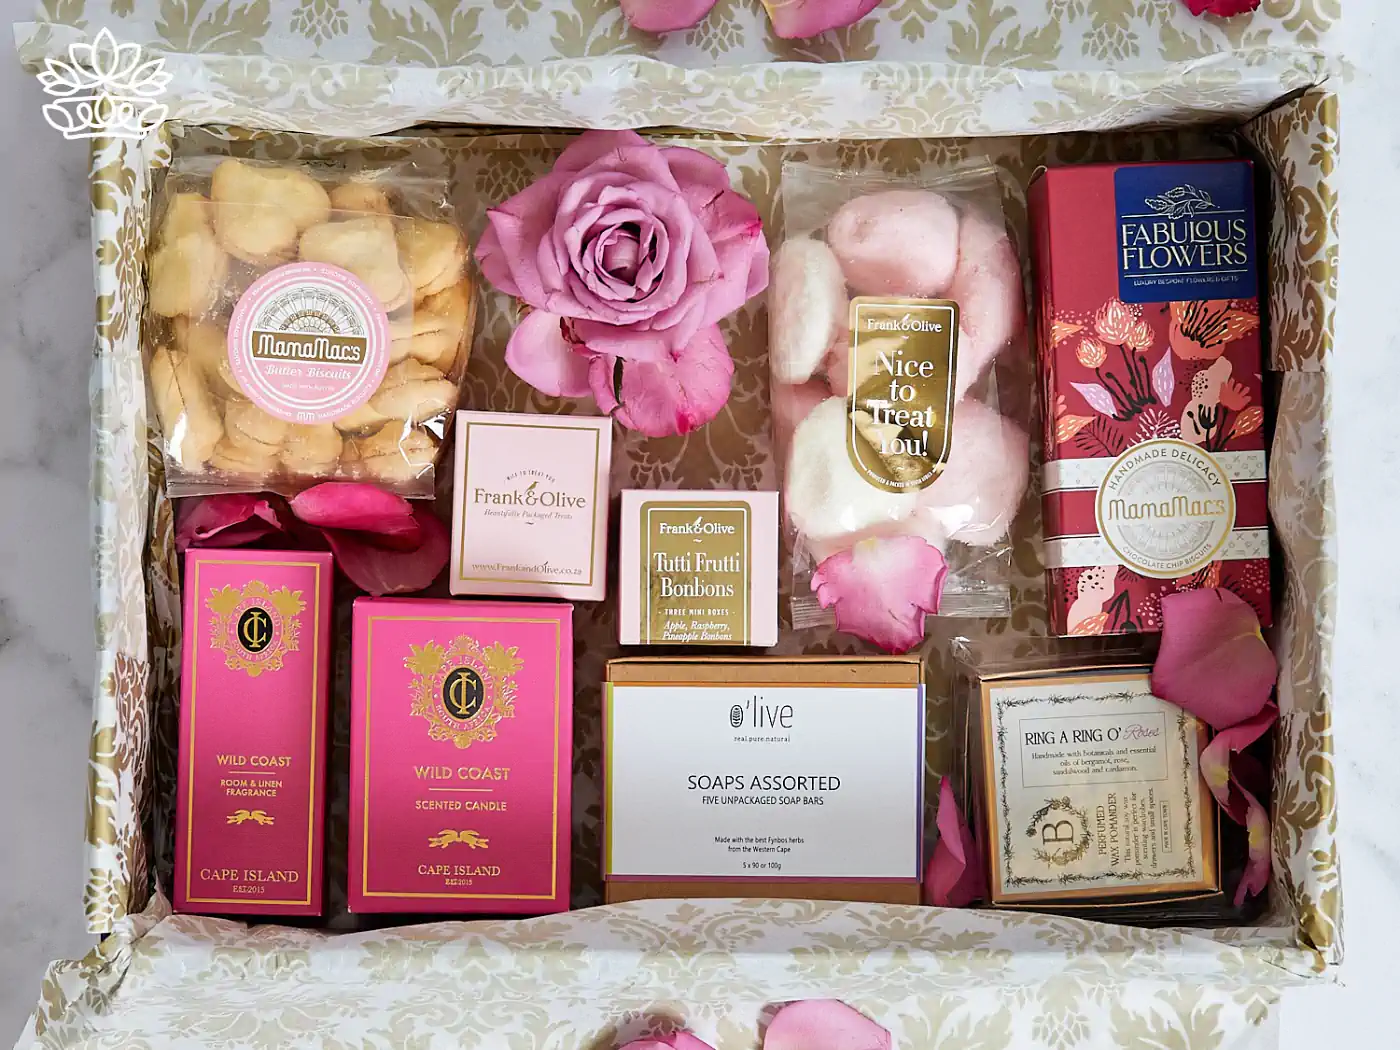 Luxurious Secretary's Day gift box filled with assorted treats including butter biscuits, scented candles, room fragrances, and handmade soaps, beautifully adorned with pink rose petals. Fabulous Flowers and Gifts